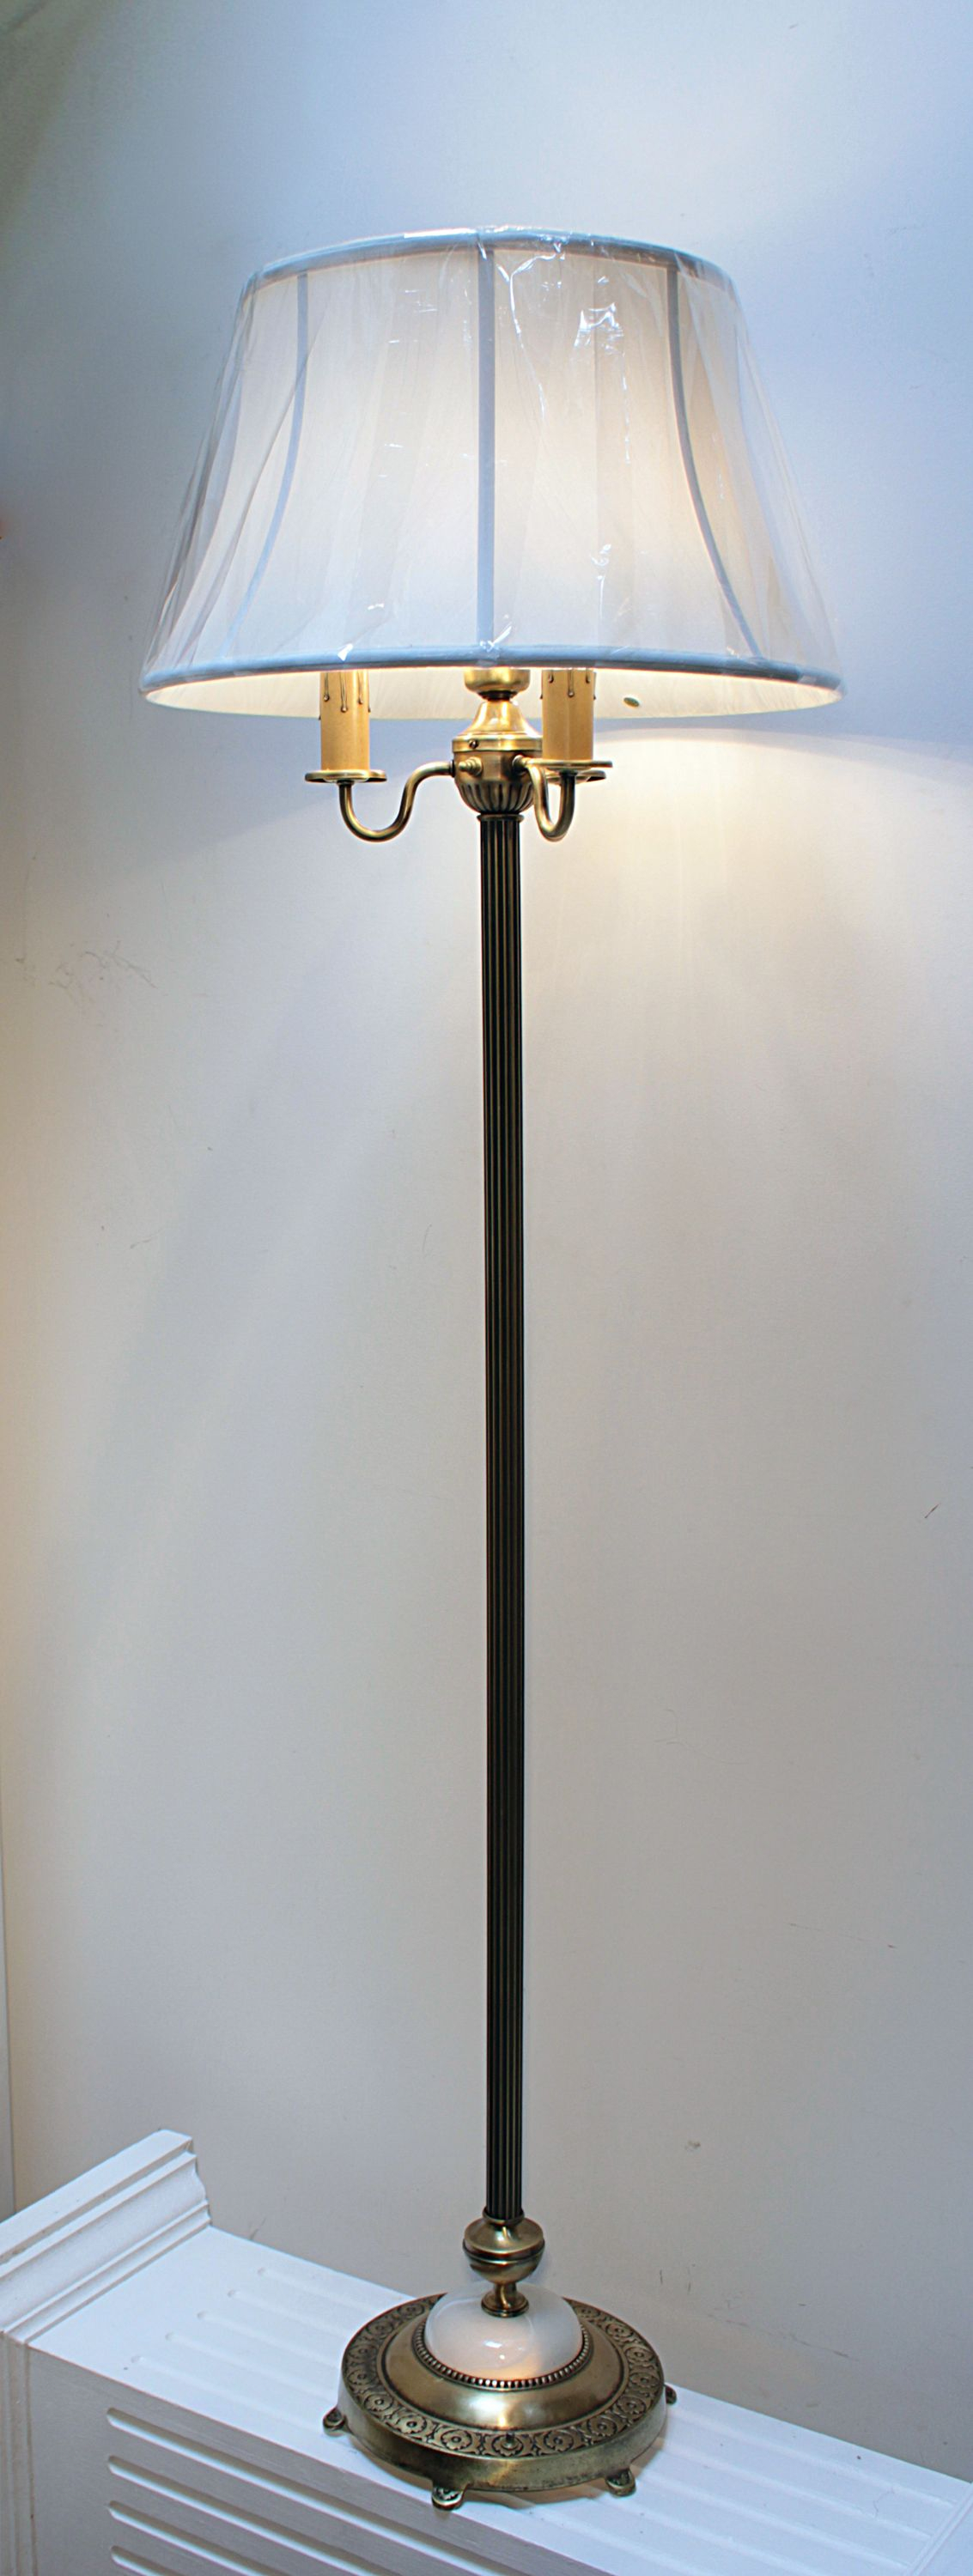 Mogul Base Floor Lamp Google Search Let There Be Light throughout proportions 1133 X 3000